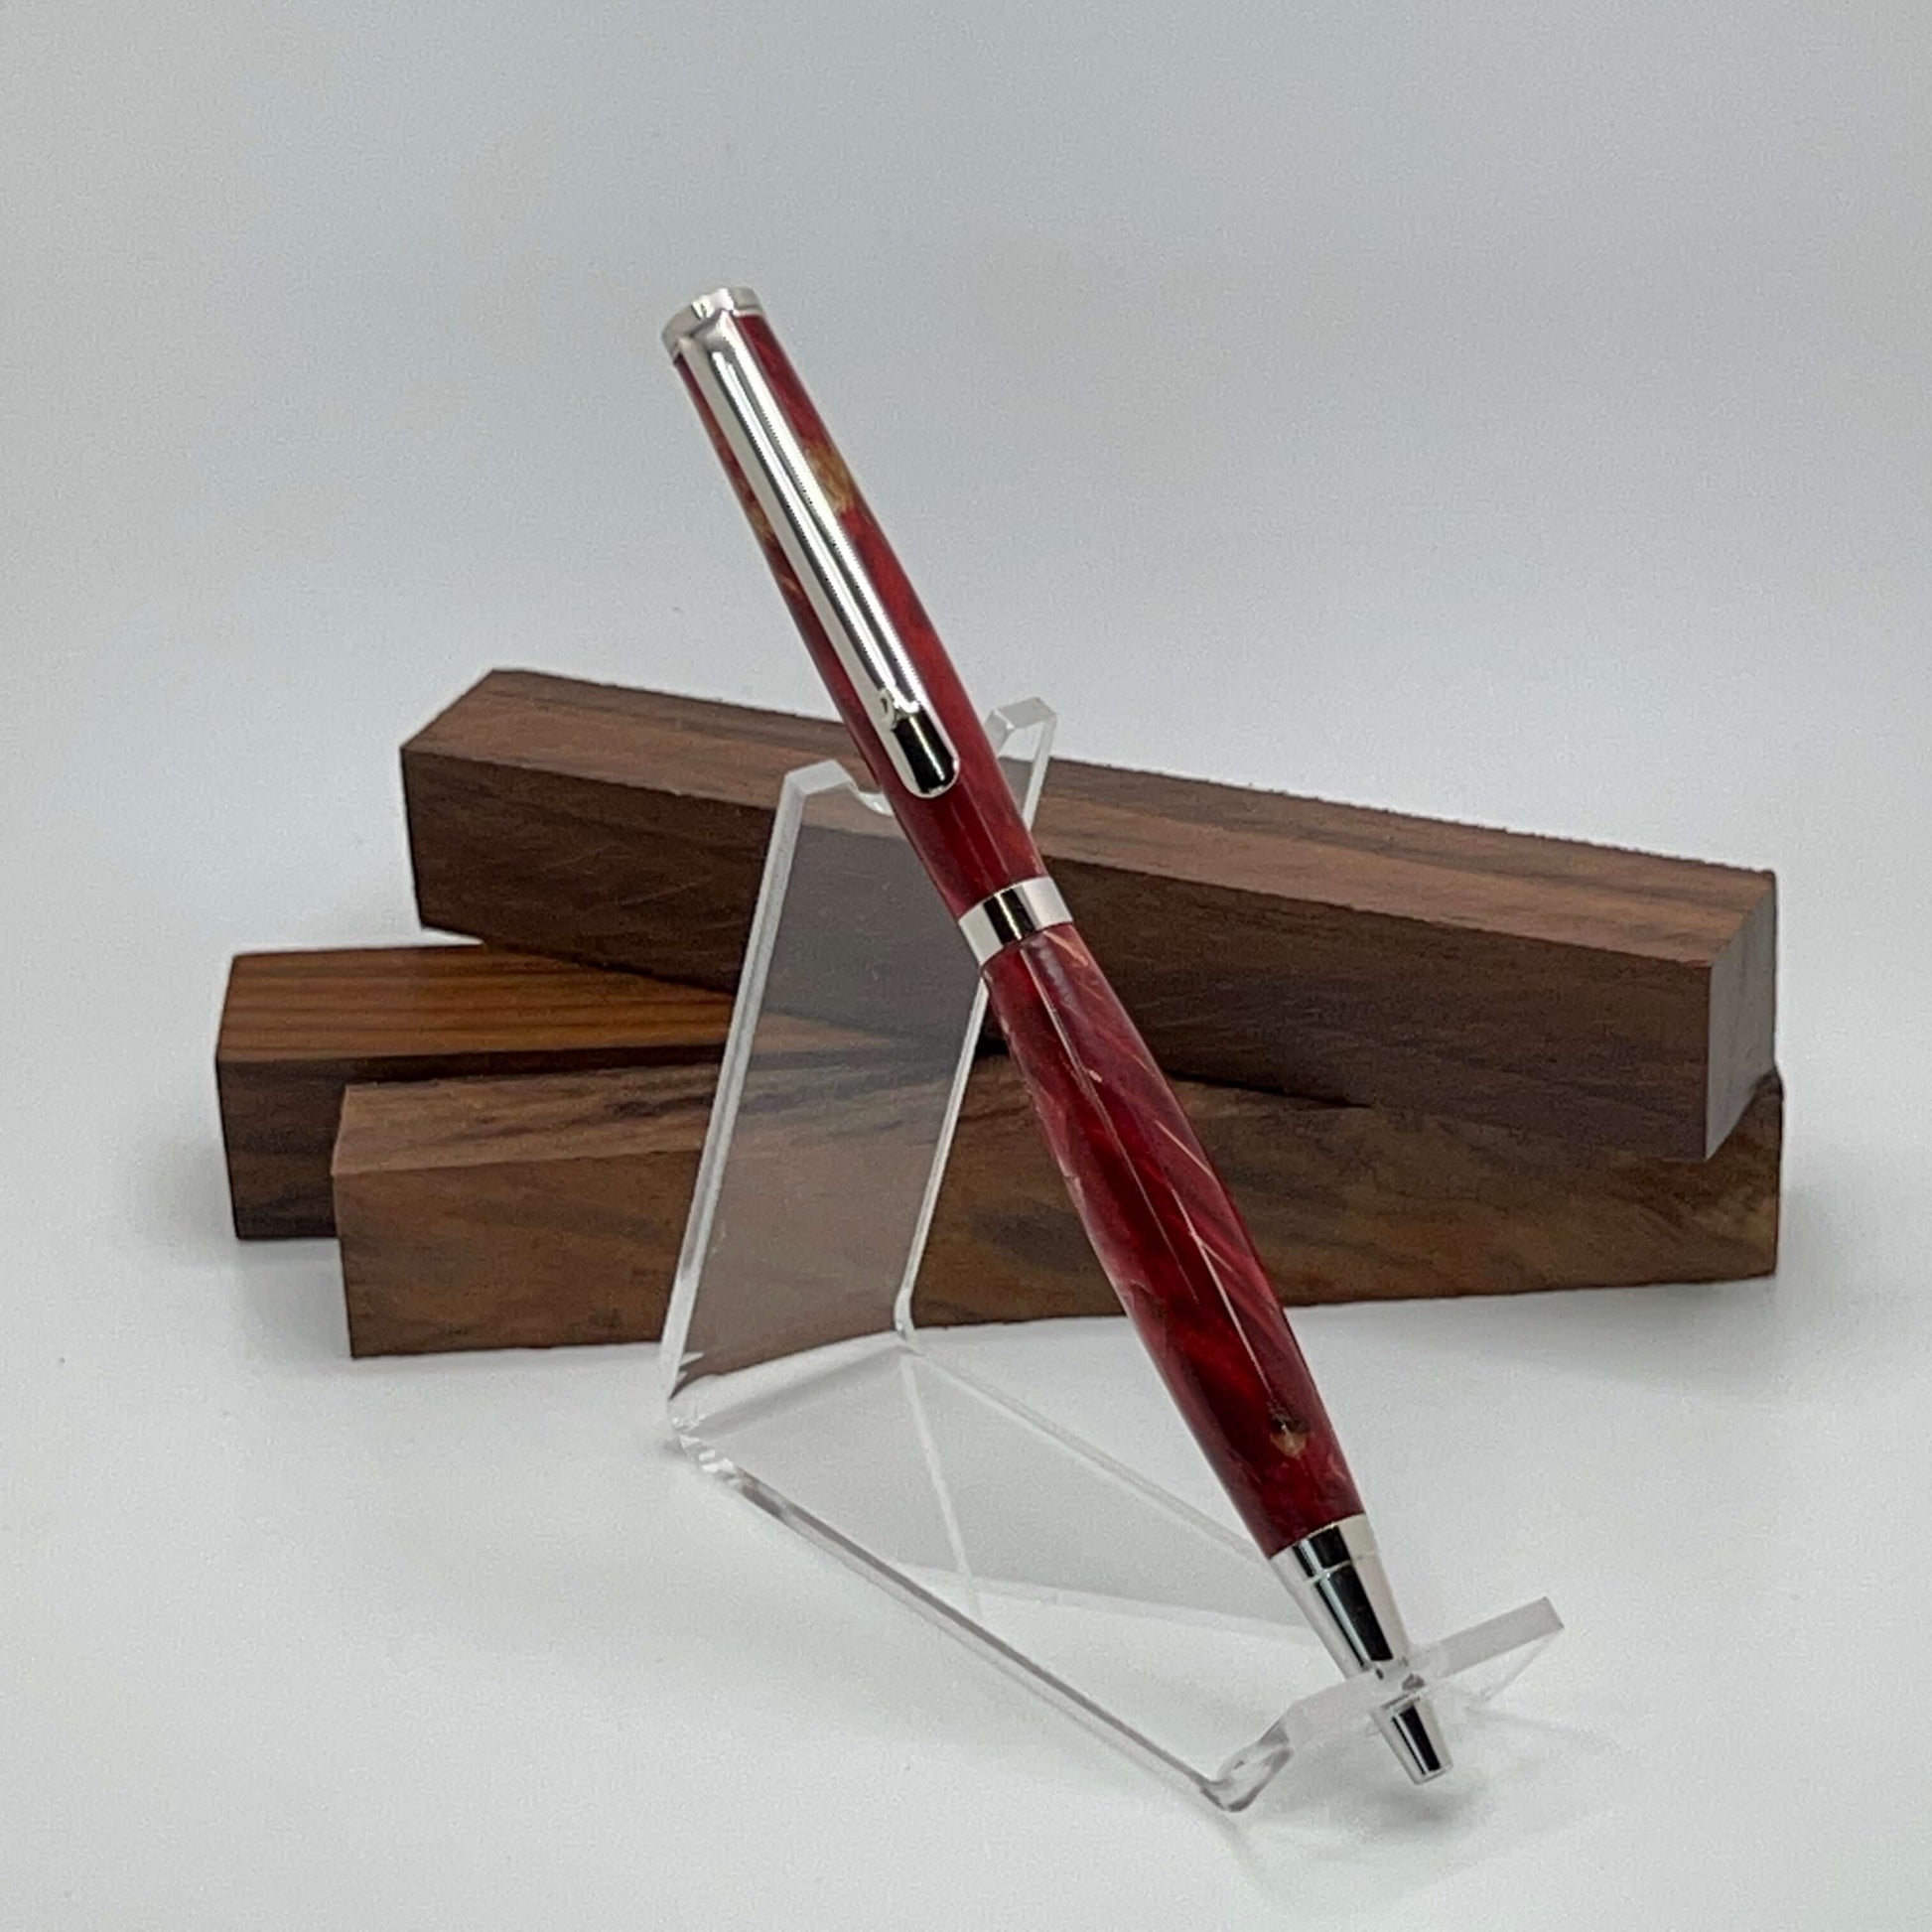 Handcrafted pen with Box Elder Burl wood dyed red and rhodium hardware